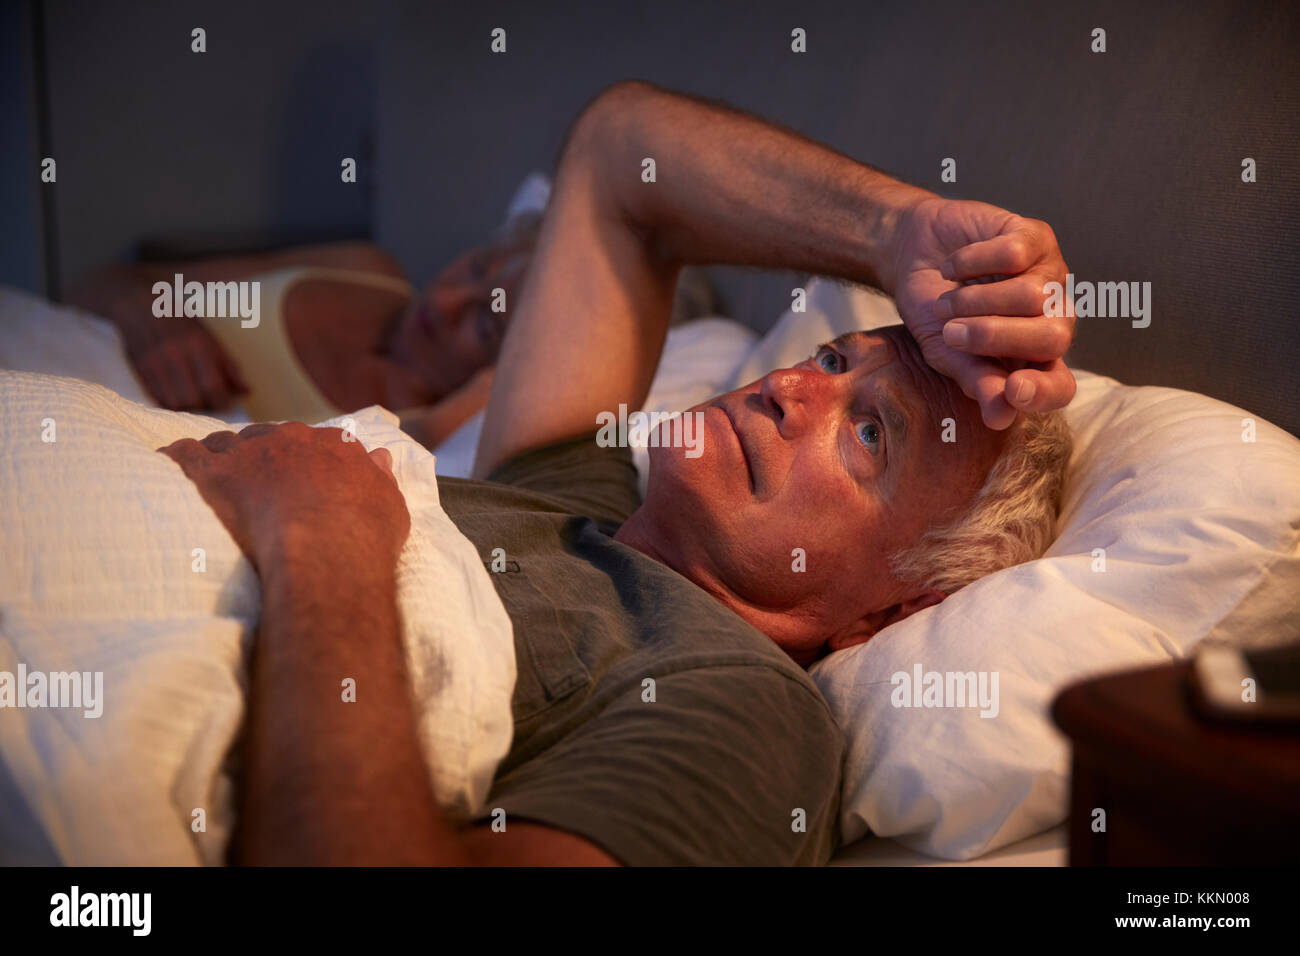 Worried Senior Man In Bed At Night Suffering With Insomnia Stock Photo